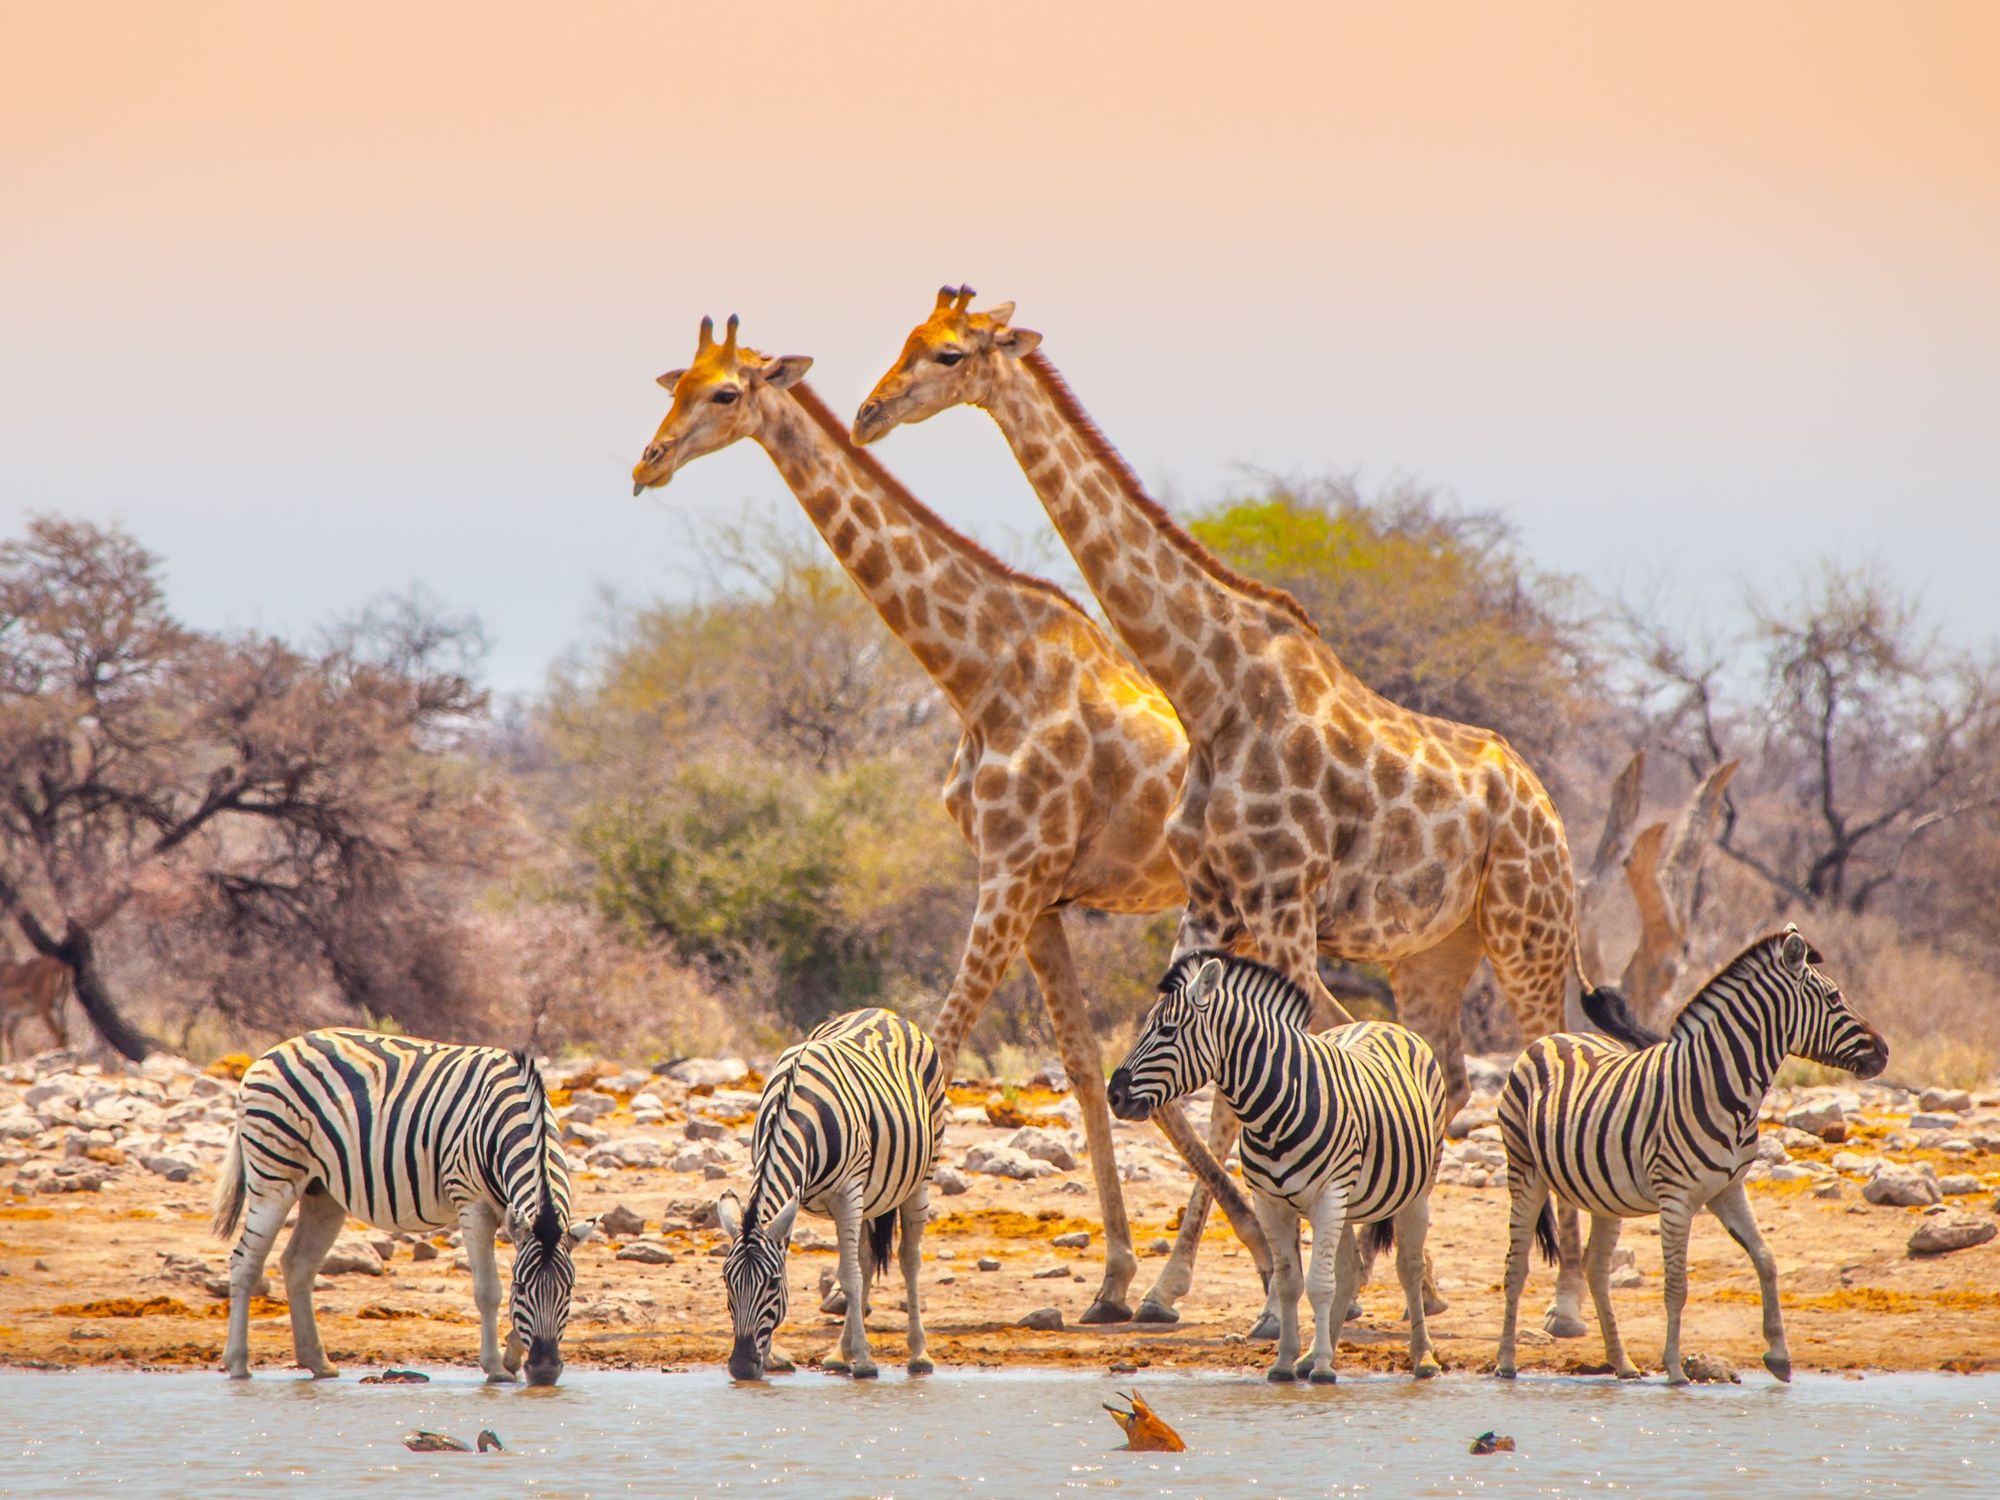 Zebras and giraffes drink while ducks dive in the water of Etosh National Park, in Namibia. Photo: Getty